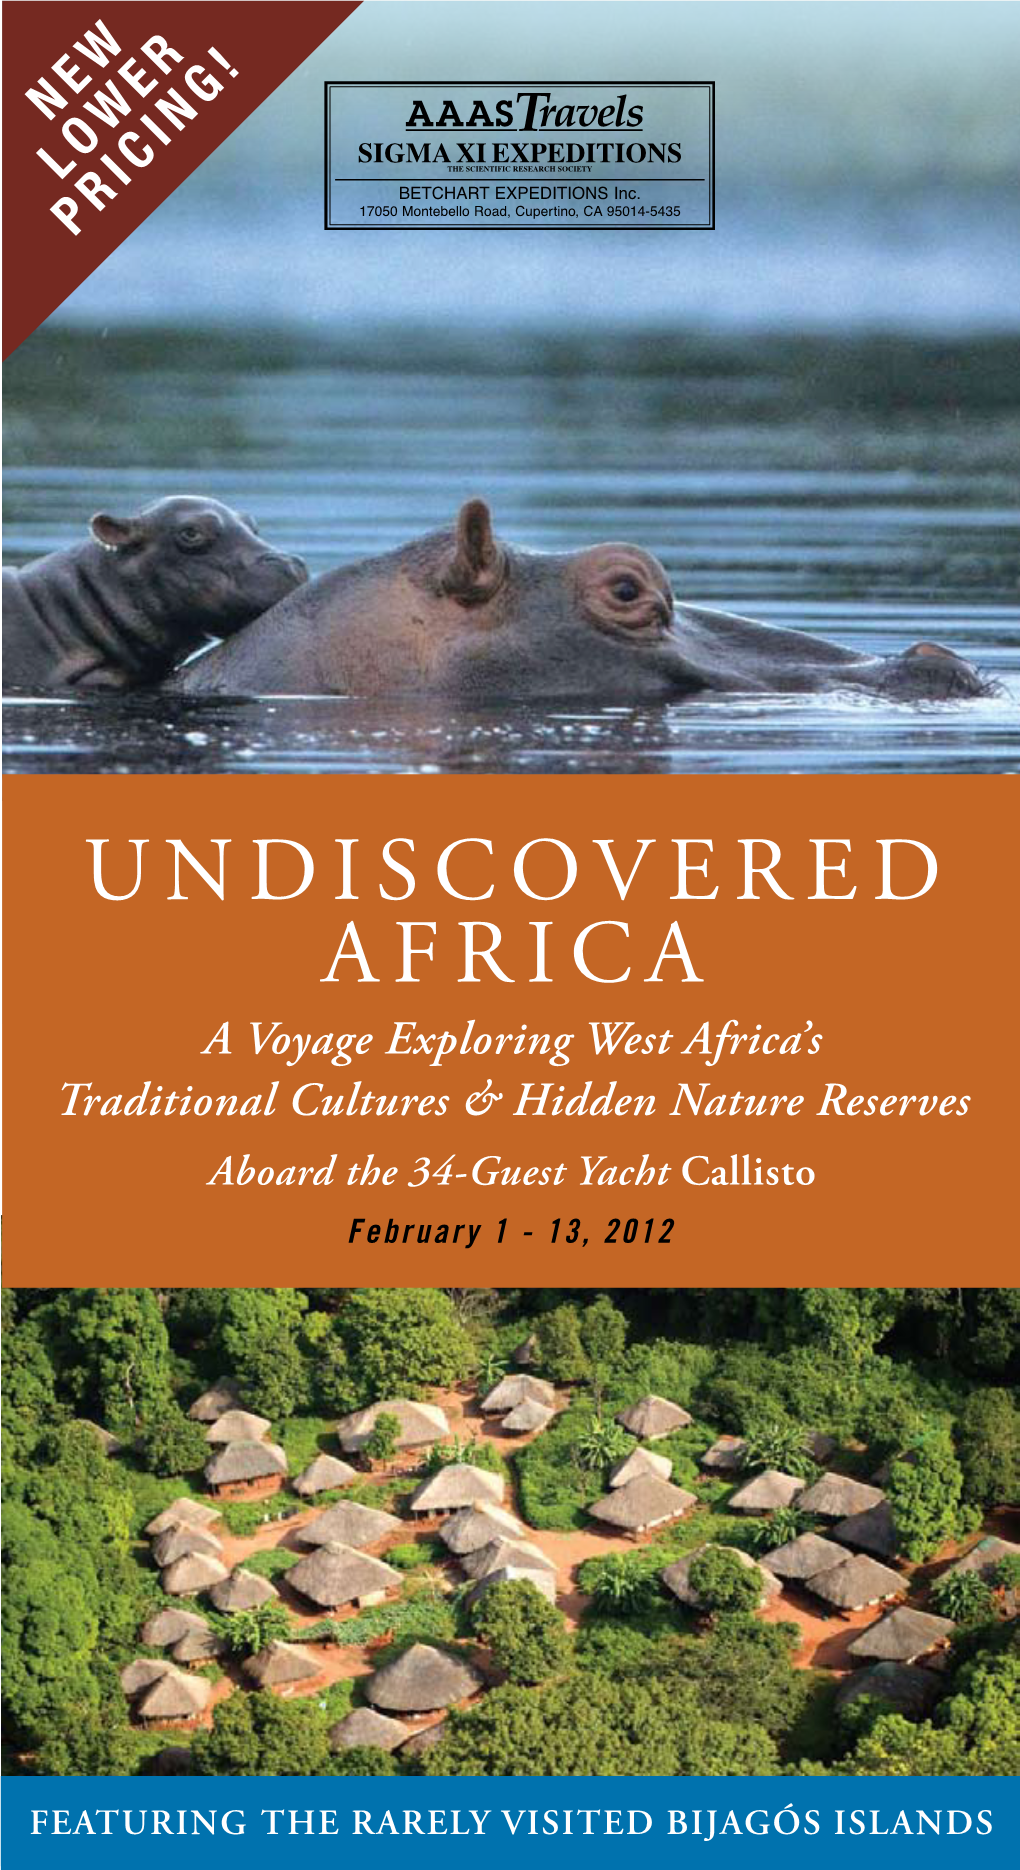 Undiscovered Africa a Voyage Exploring West Africa’S Traditional Cultures & Hidden Nature Reserves Aboard the 34-Guest Yacht Callisto February 1 - 13, 2012